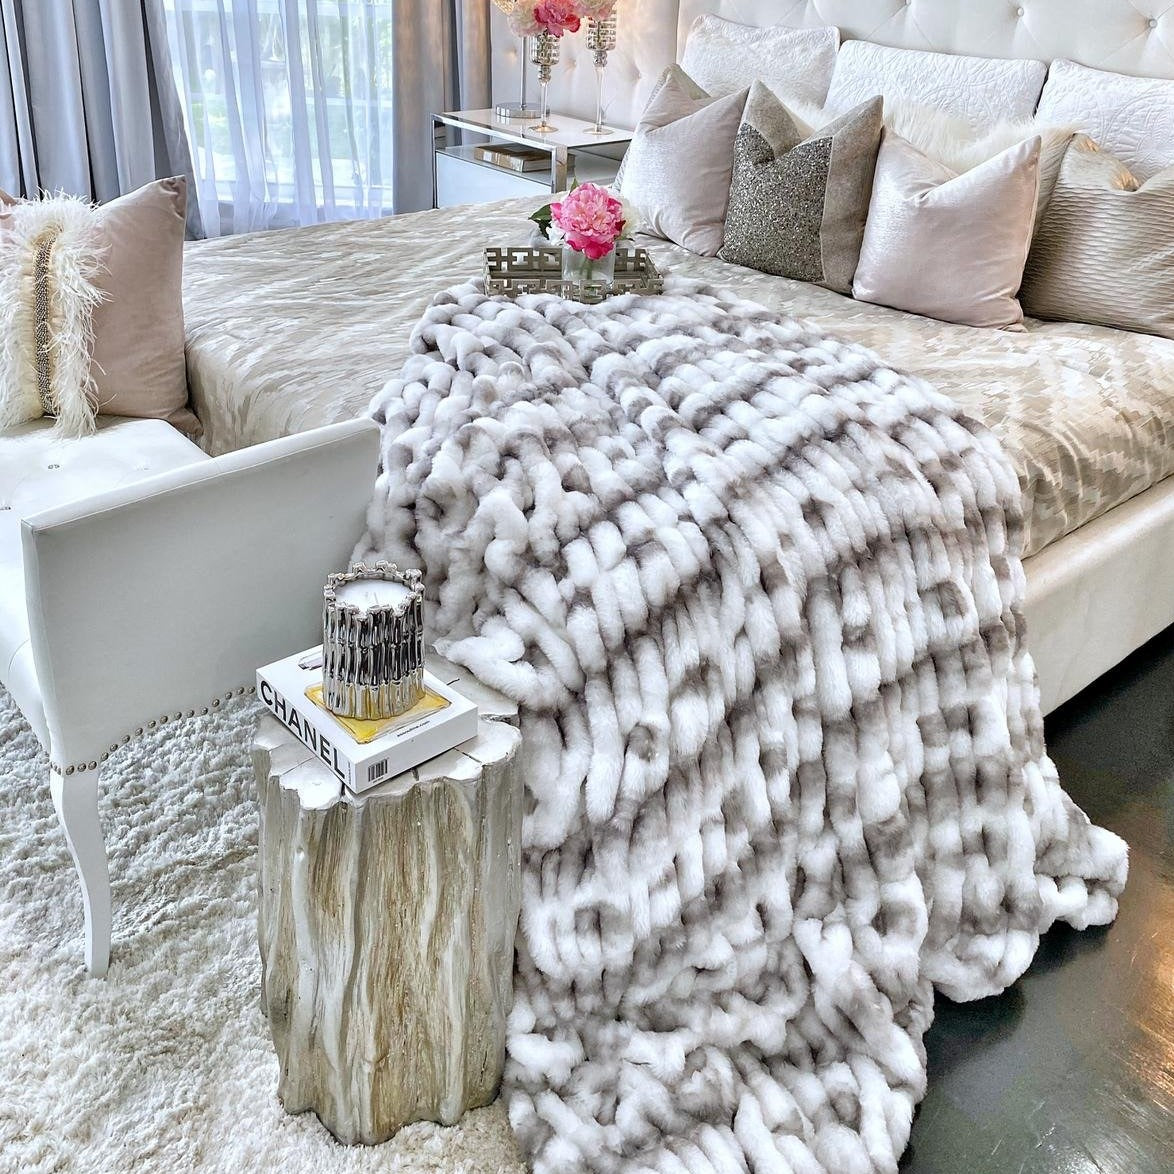 Braided Look Fluffy Soft Faux Fur Gray White Throw/Quilt/Blanket/ Coverlet/Bedspread/Bedcover